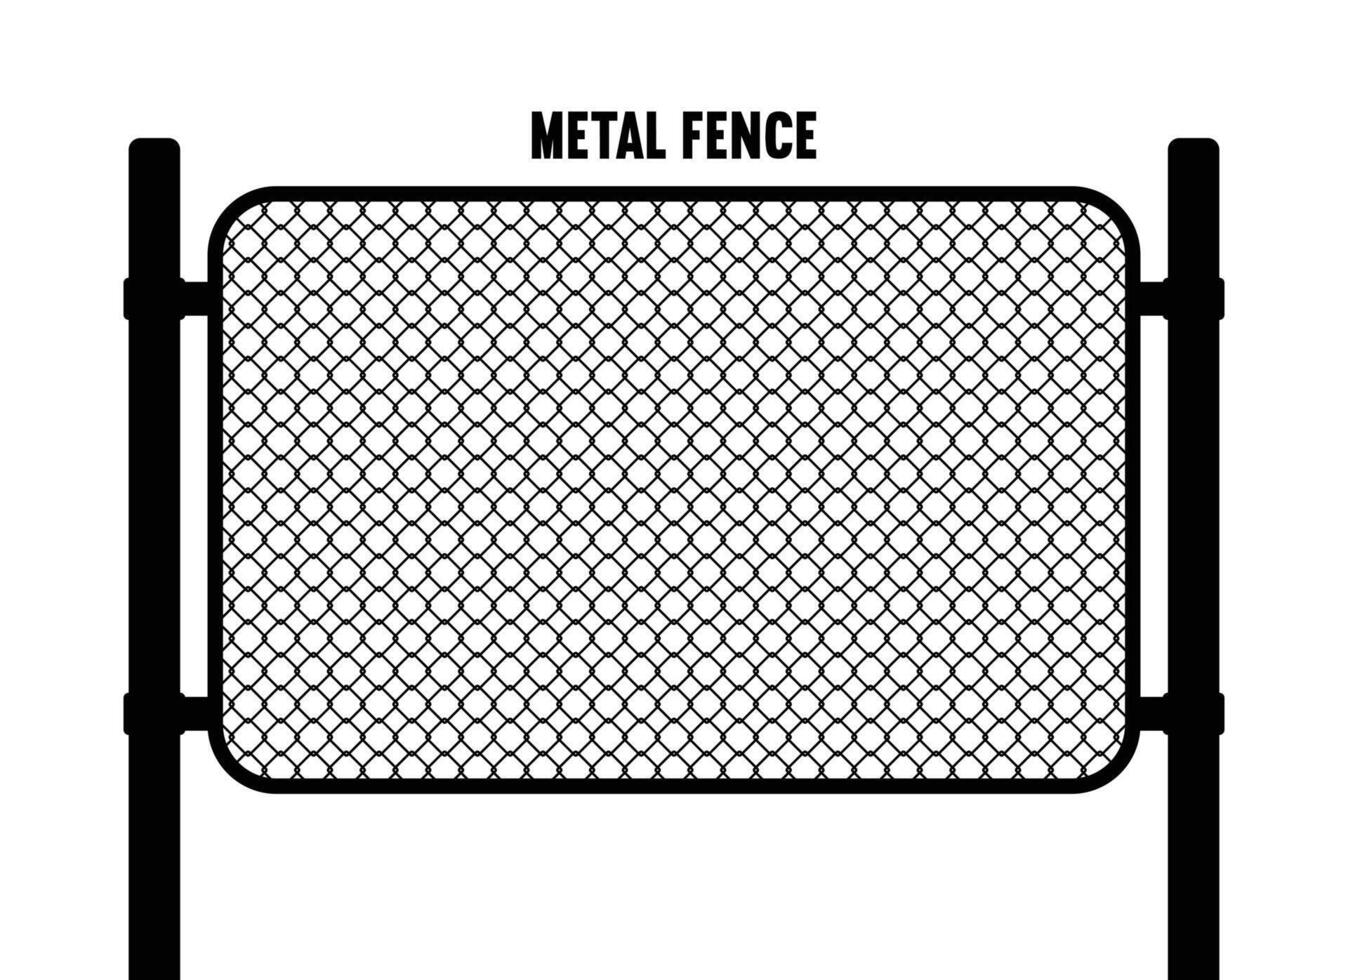 Chain link fence. Fences made of metal wire mesh on white background. Wired Fence pattern in realistic style vector